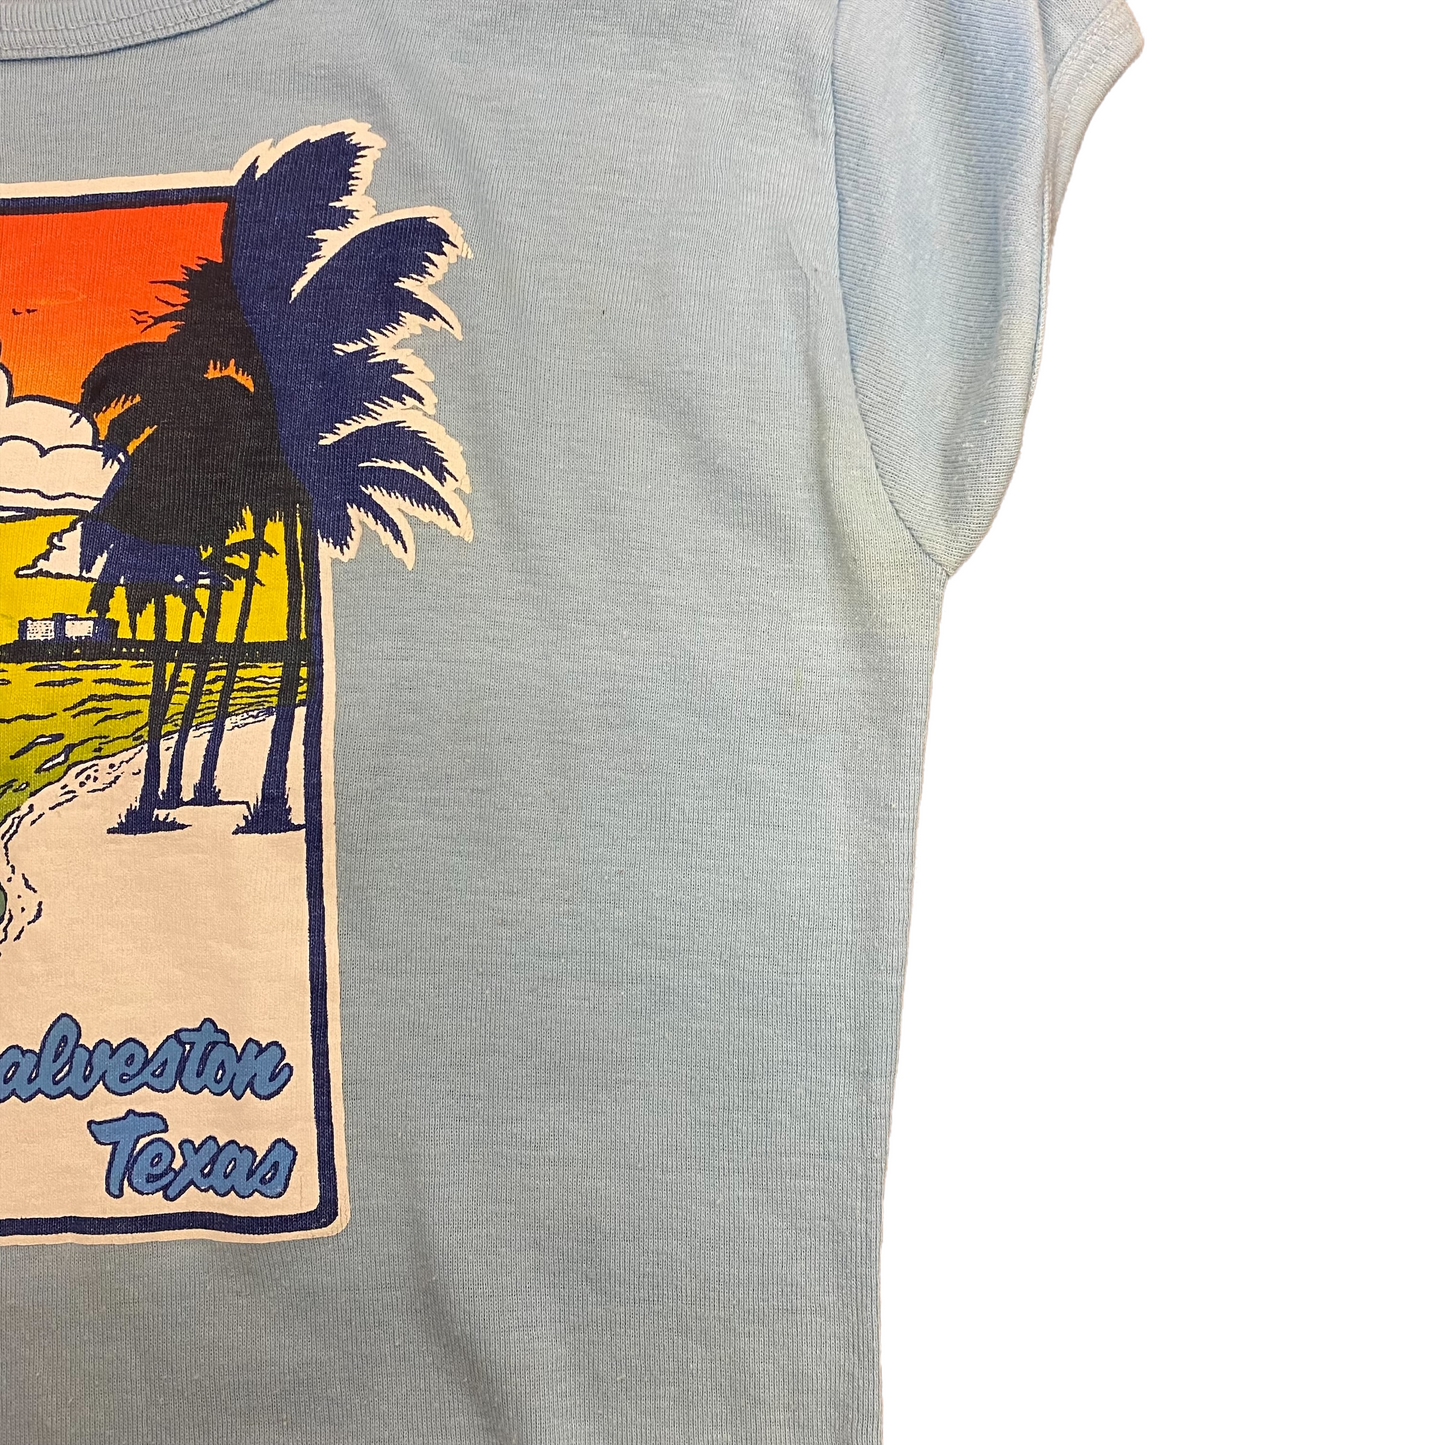 Early 1980s Galveston Texas Destination Tee - Size Large (fits small)